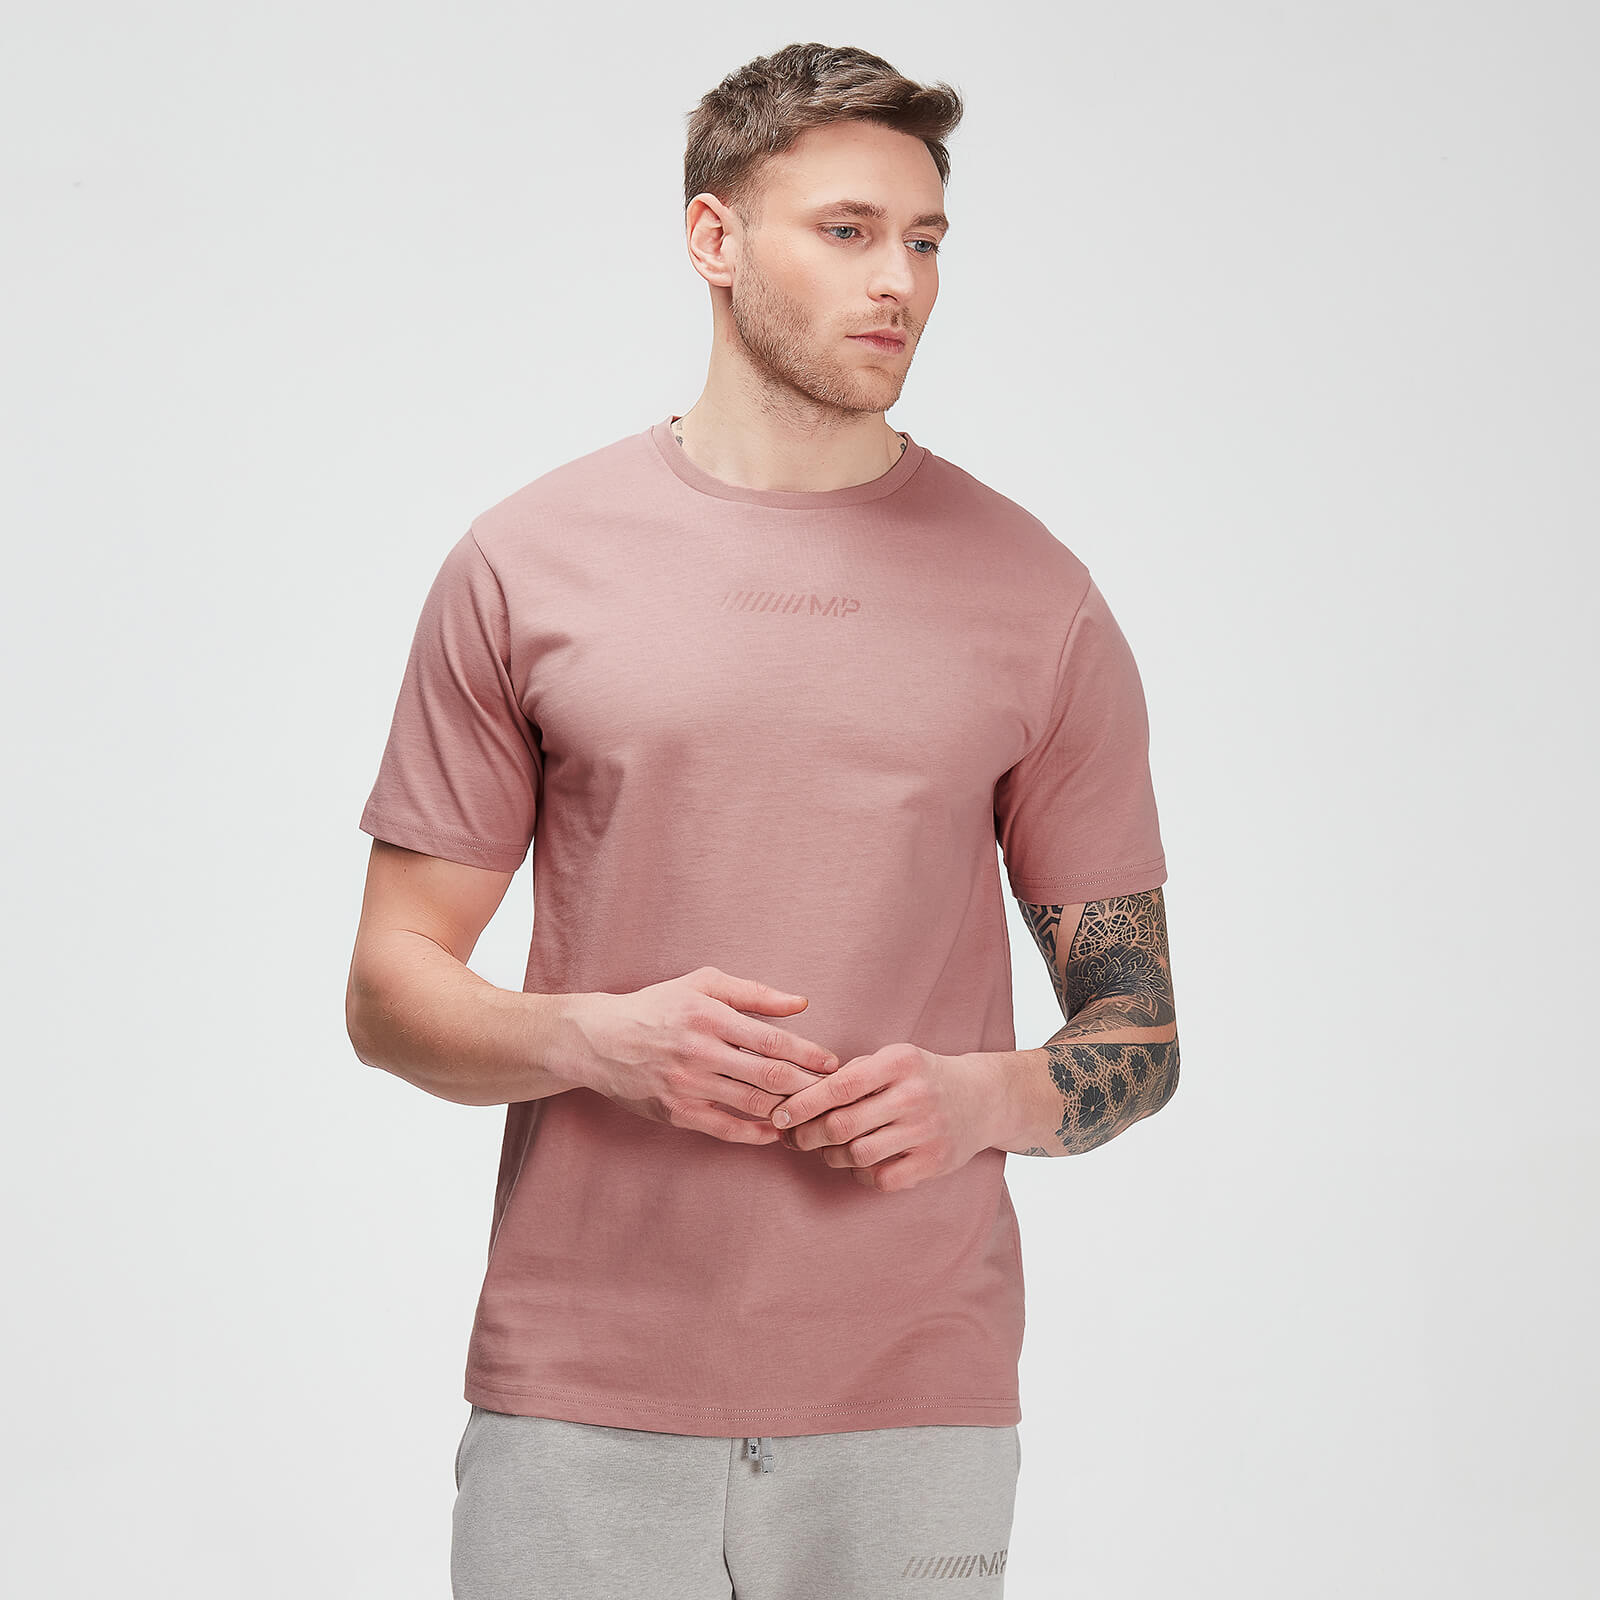 MP Men's Tonal Graphic Short Sleeve T-shirt – Washed Pink - XS